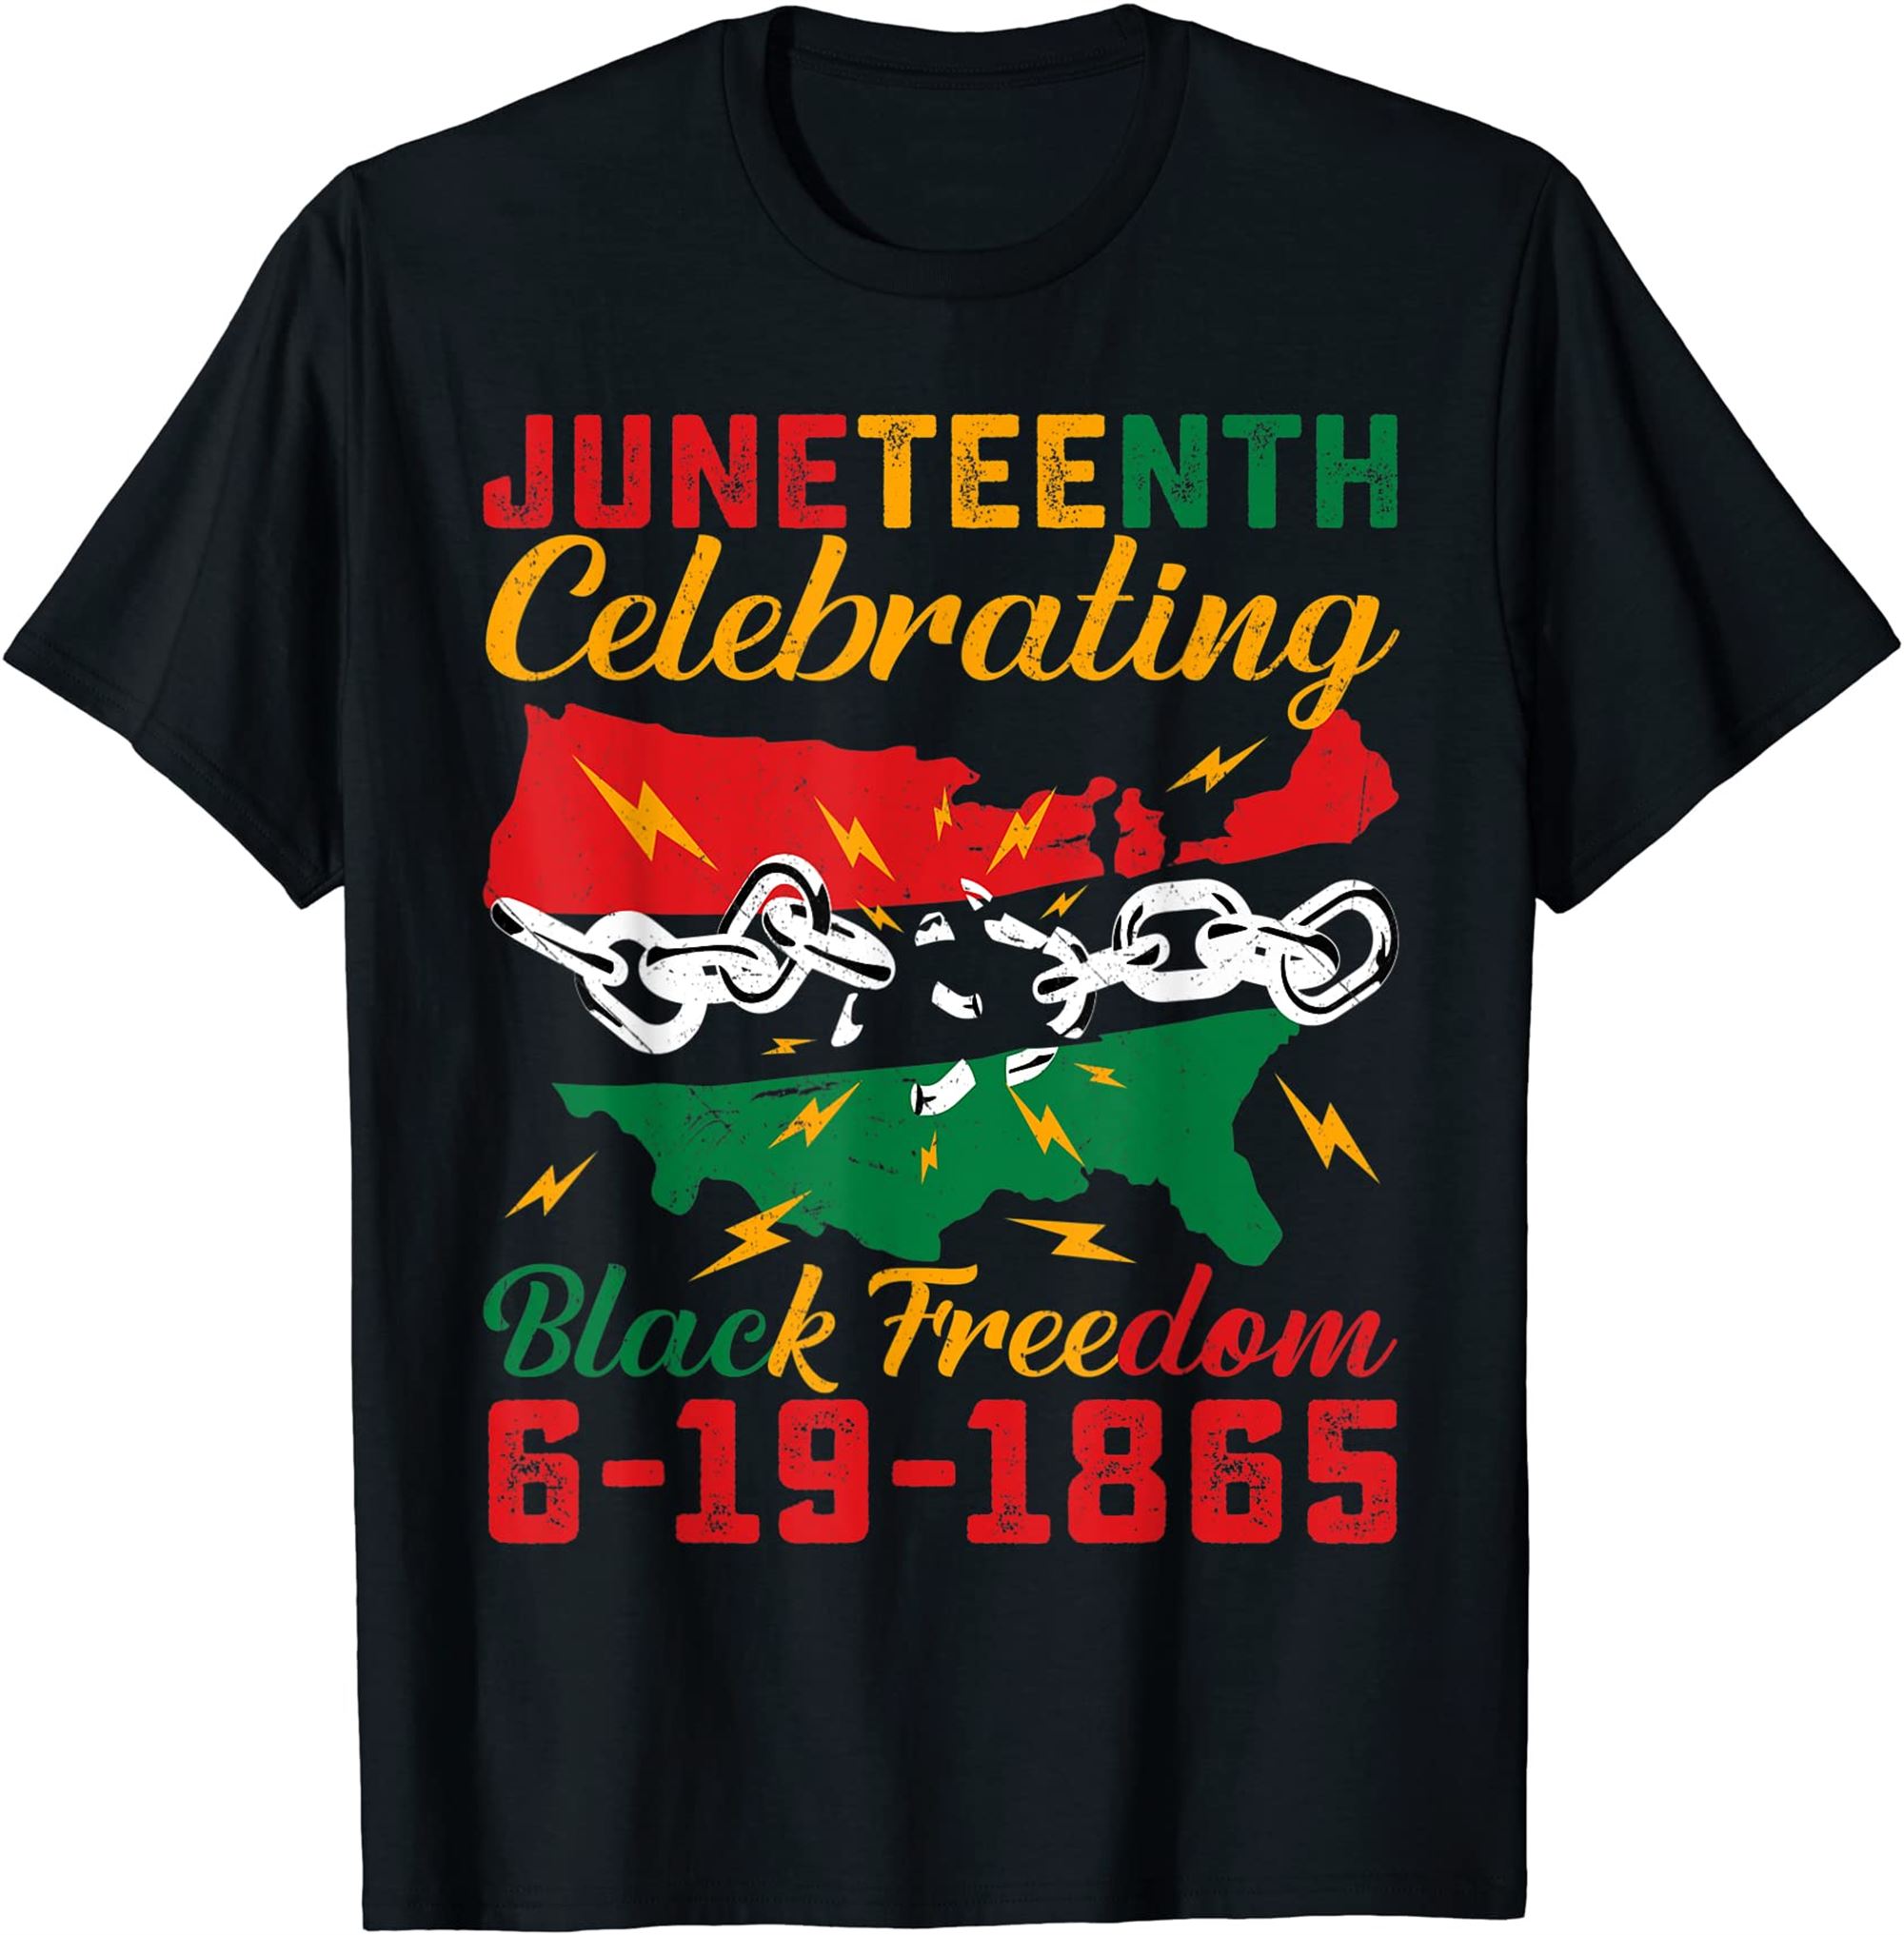 Juneteenth Celebrating Black Freedom 1865 African American T-shirt Size Up To 5xl